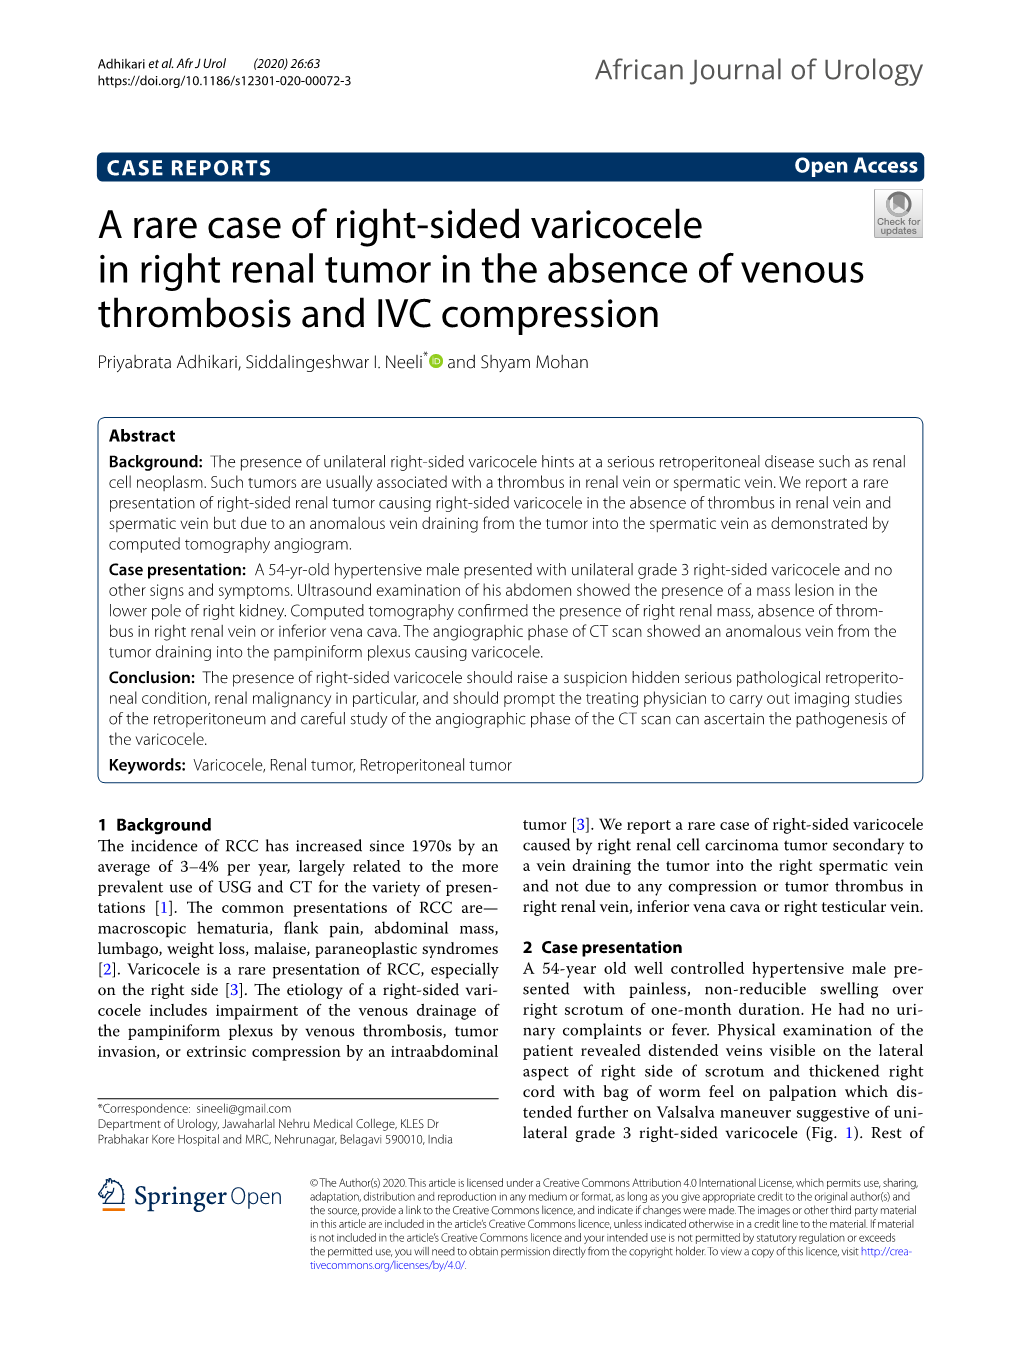 A Rare Case of Right-Sided Varicocele in Right Renal Tumor in the Absence of Venous Thrombosis and IVC Compression